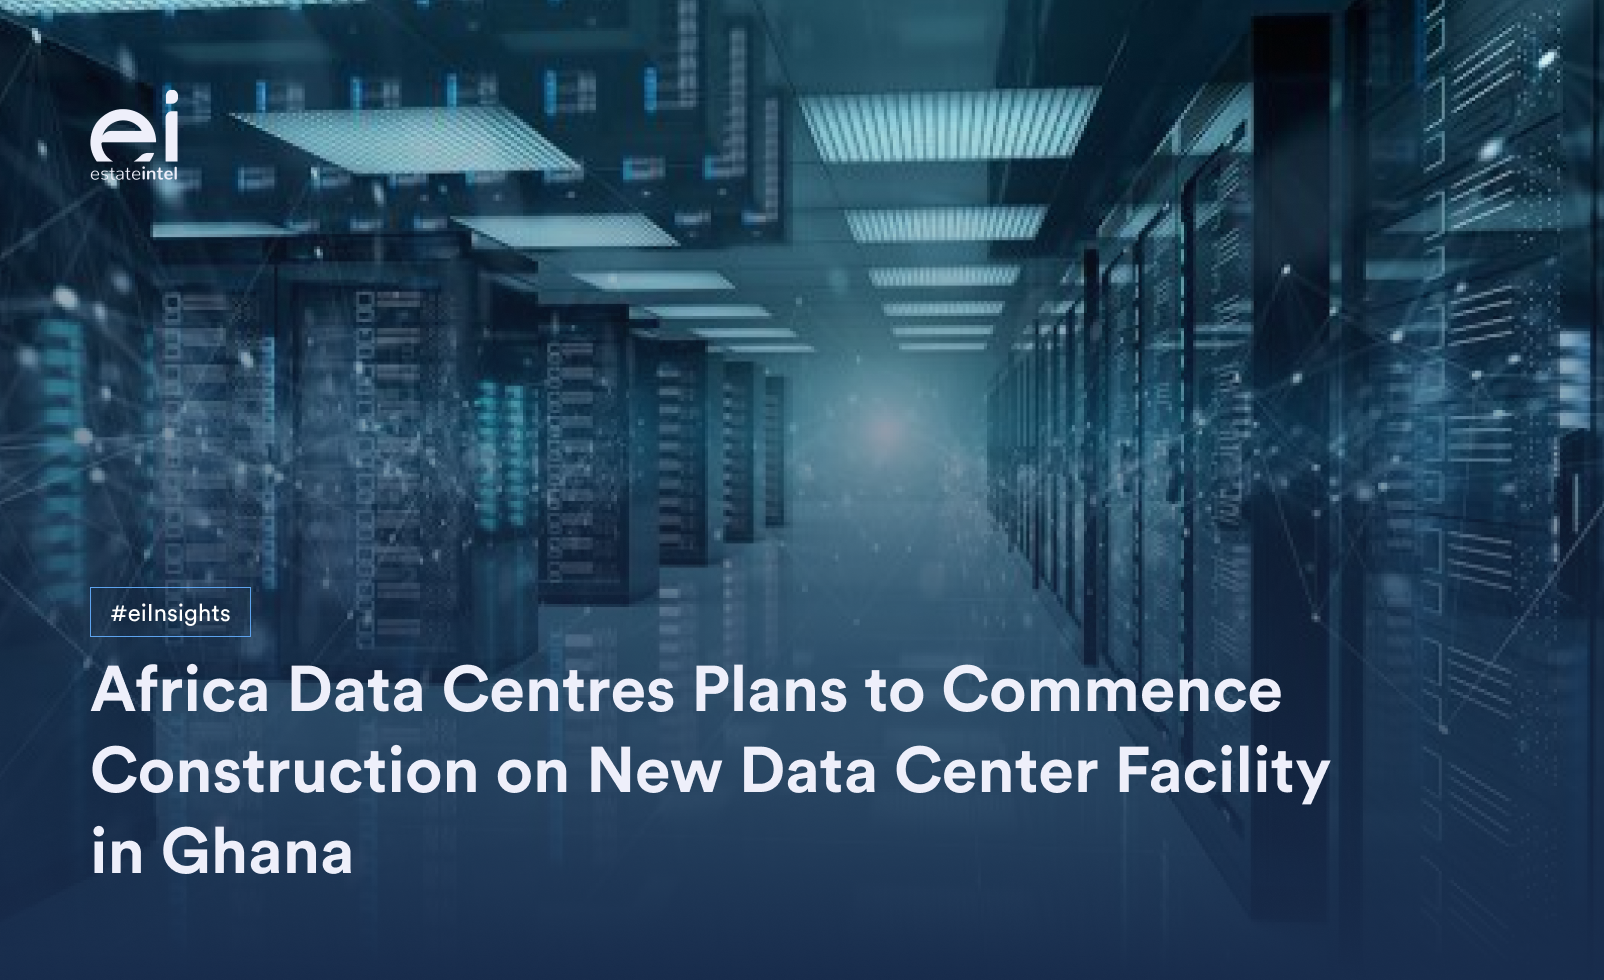 Africa Data Centres Plans to Commence Construction on New Data Center Facility in Ghana